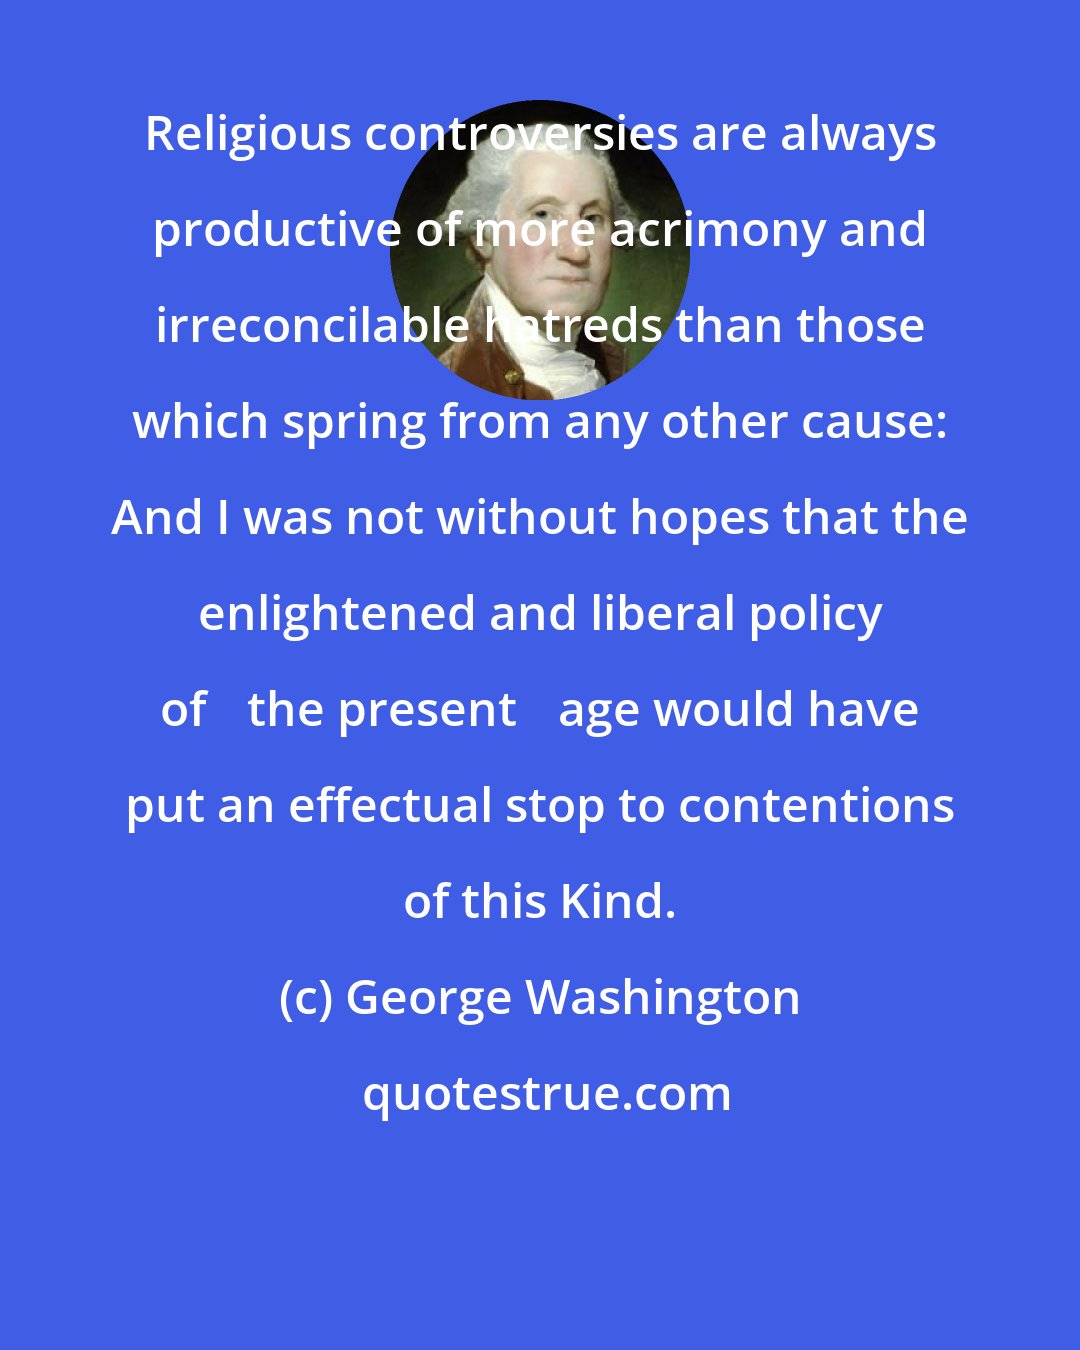 George Washington: Religious controversies are always productive of more acrimony and irreconcilable hatreds than those which spring from any other cause: And I was not without hopes that the enlightened and liberal policy of ⟨the present⟩ age would have put an effectual stop to contentions of this Kind.